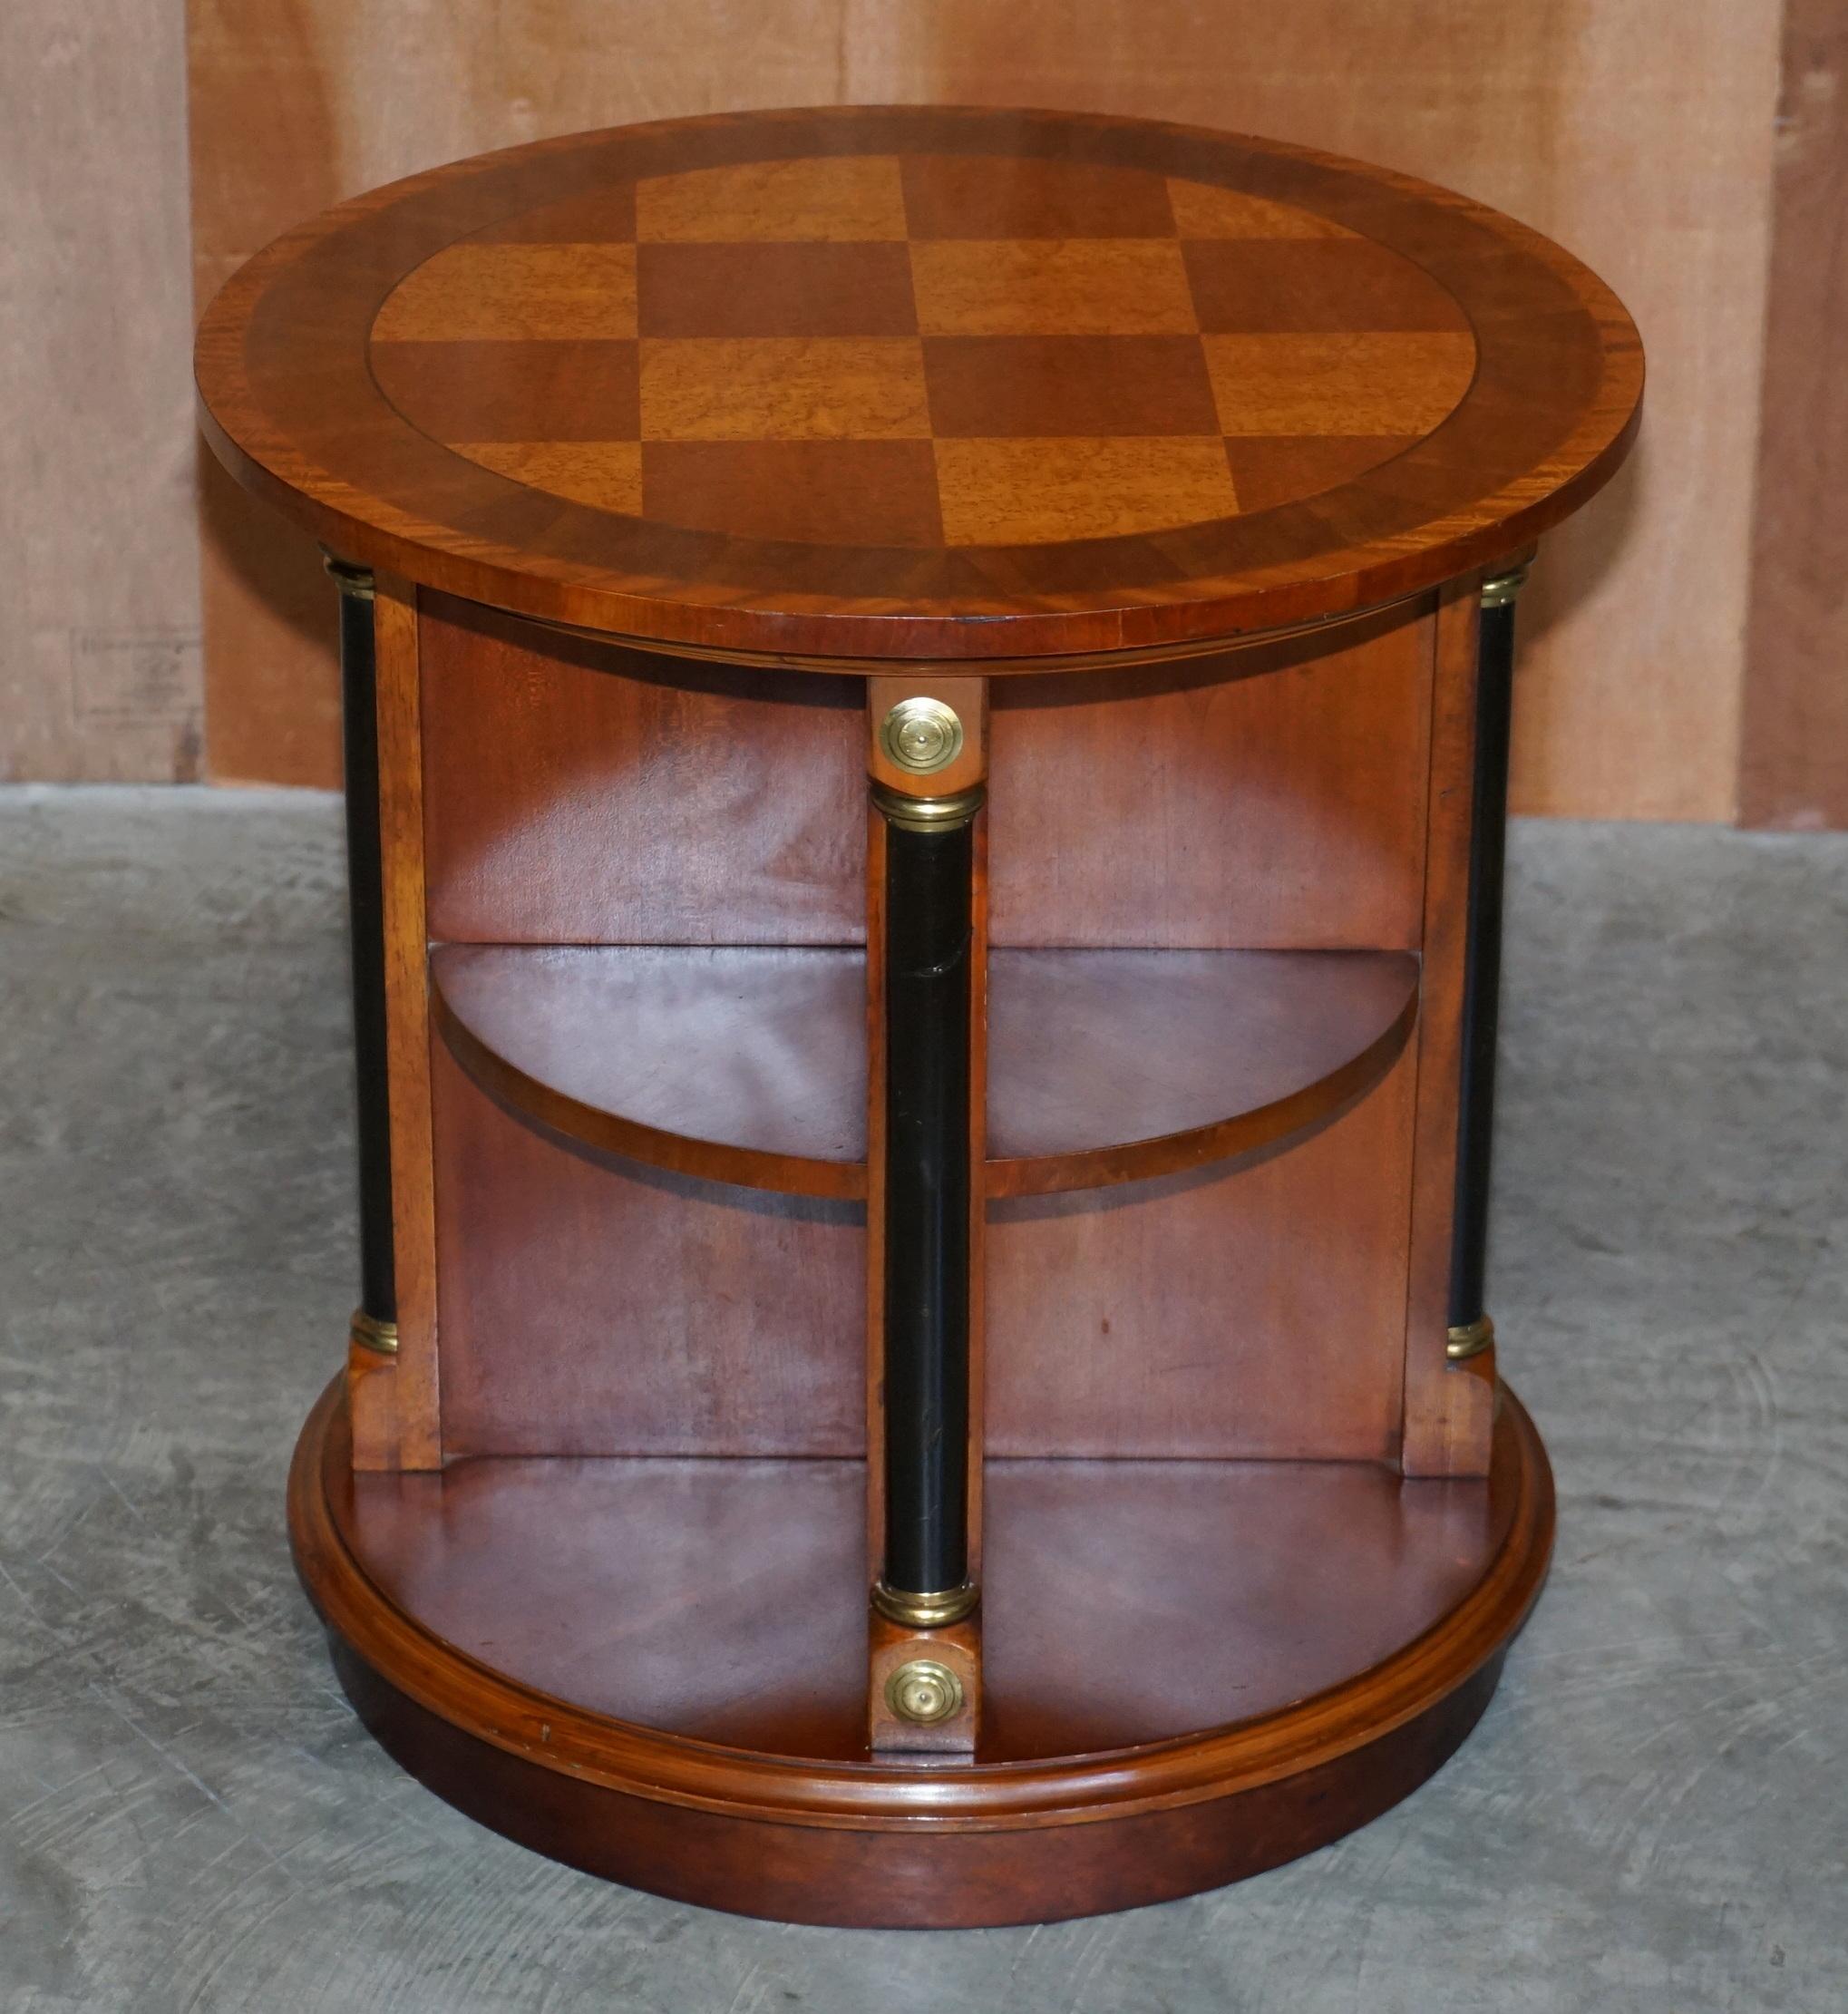 We are delighted to offer for sale this lovely vintage Swedish burr satinwood revolving book table in the Biedermeier taste

A wonderfully decorative and super original piece. This is larger than the usual and comes with a heavily burred satinwood